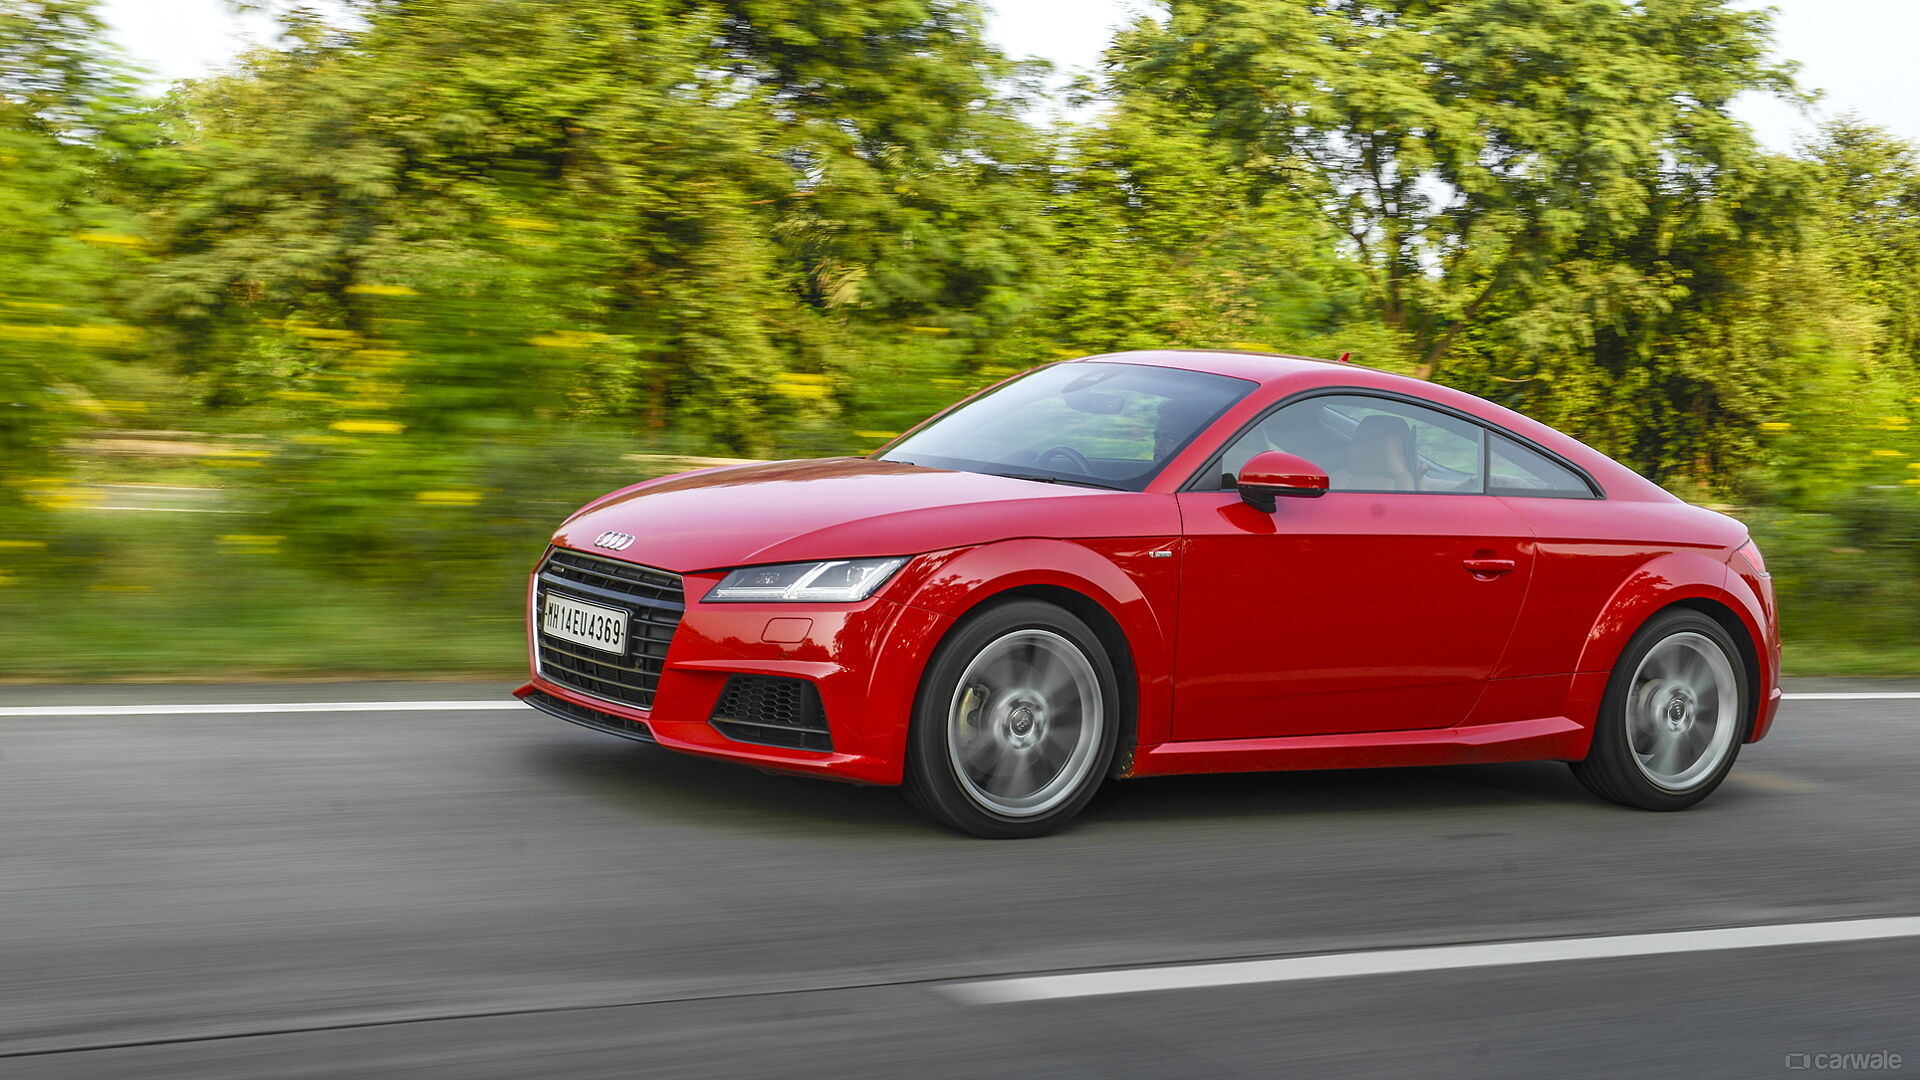 2022 Audi TT RS : Latest Prices, Reviews, Specs, Photos and